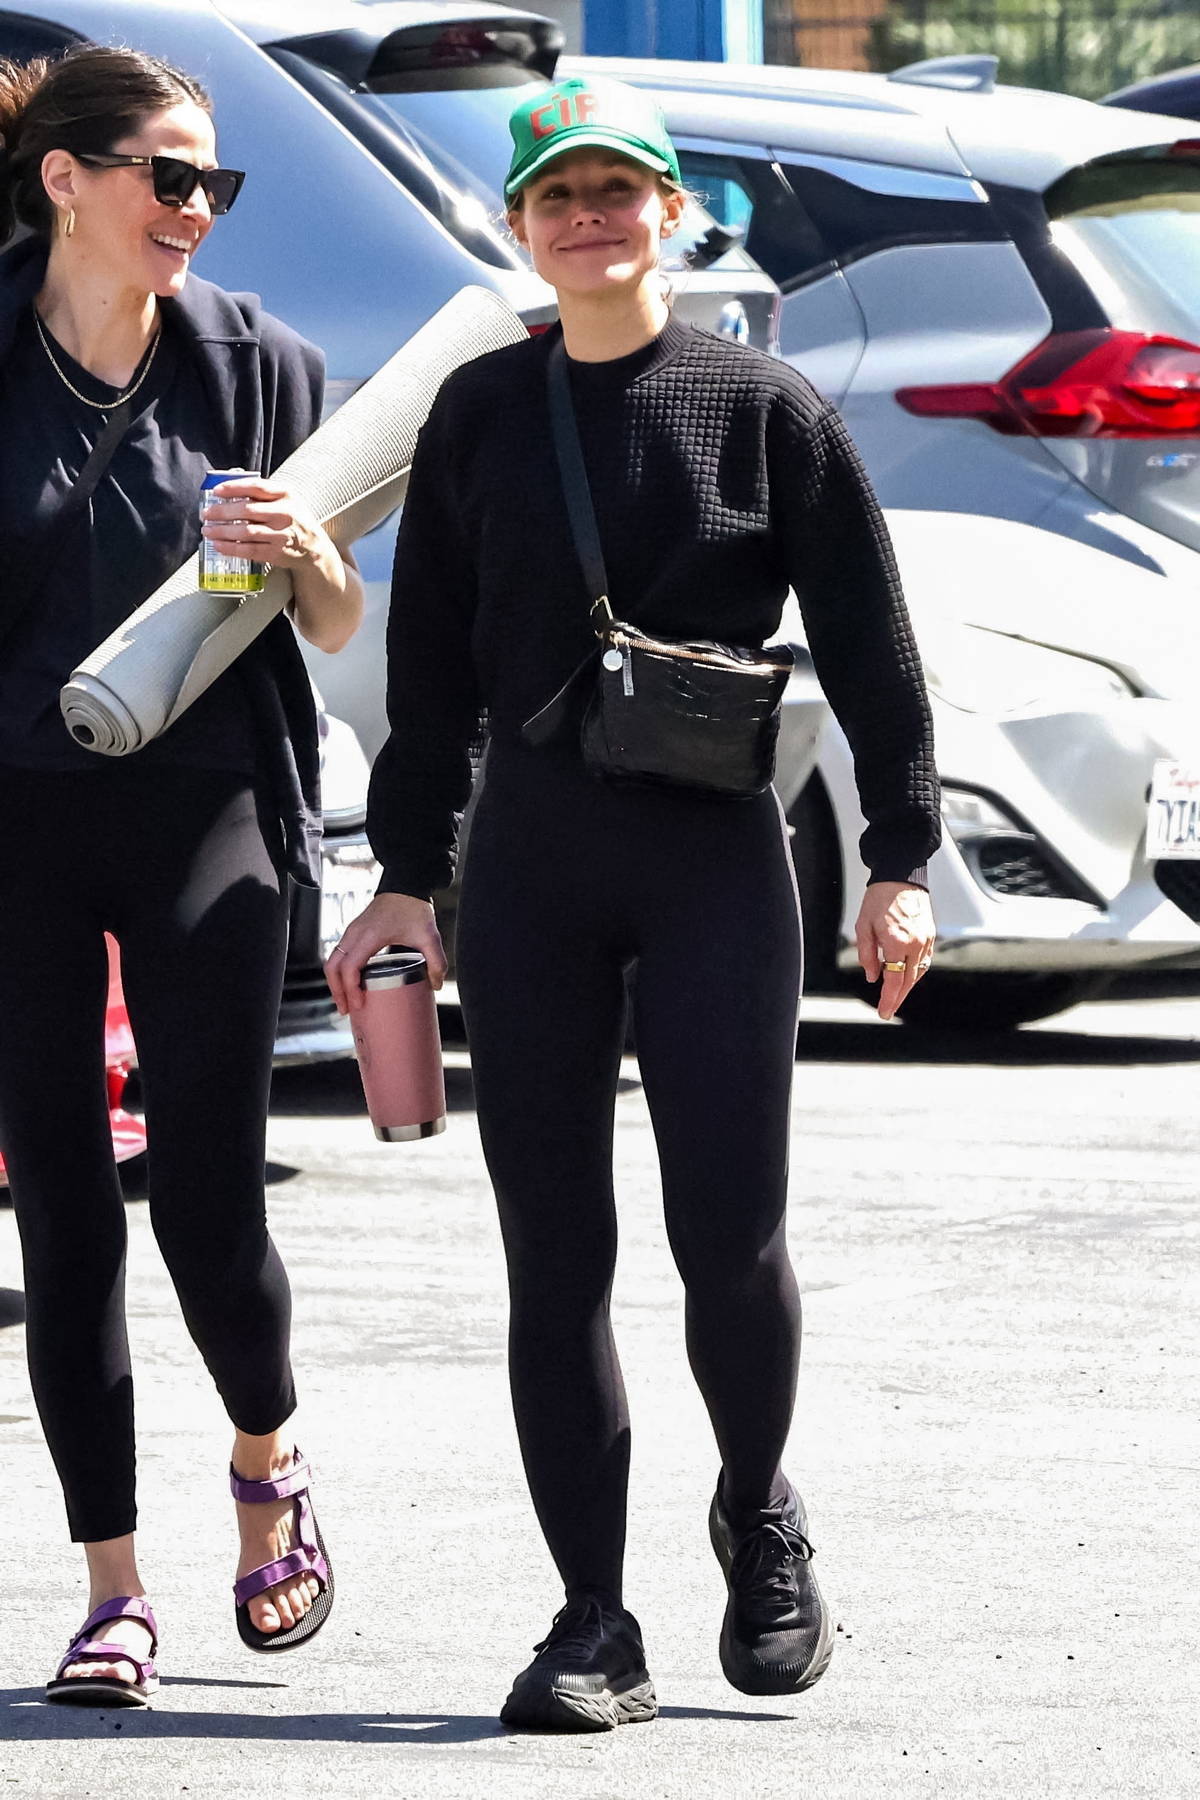 Kristen Bell parades her post-pregnancy curves in tight black